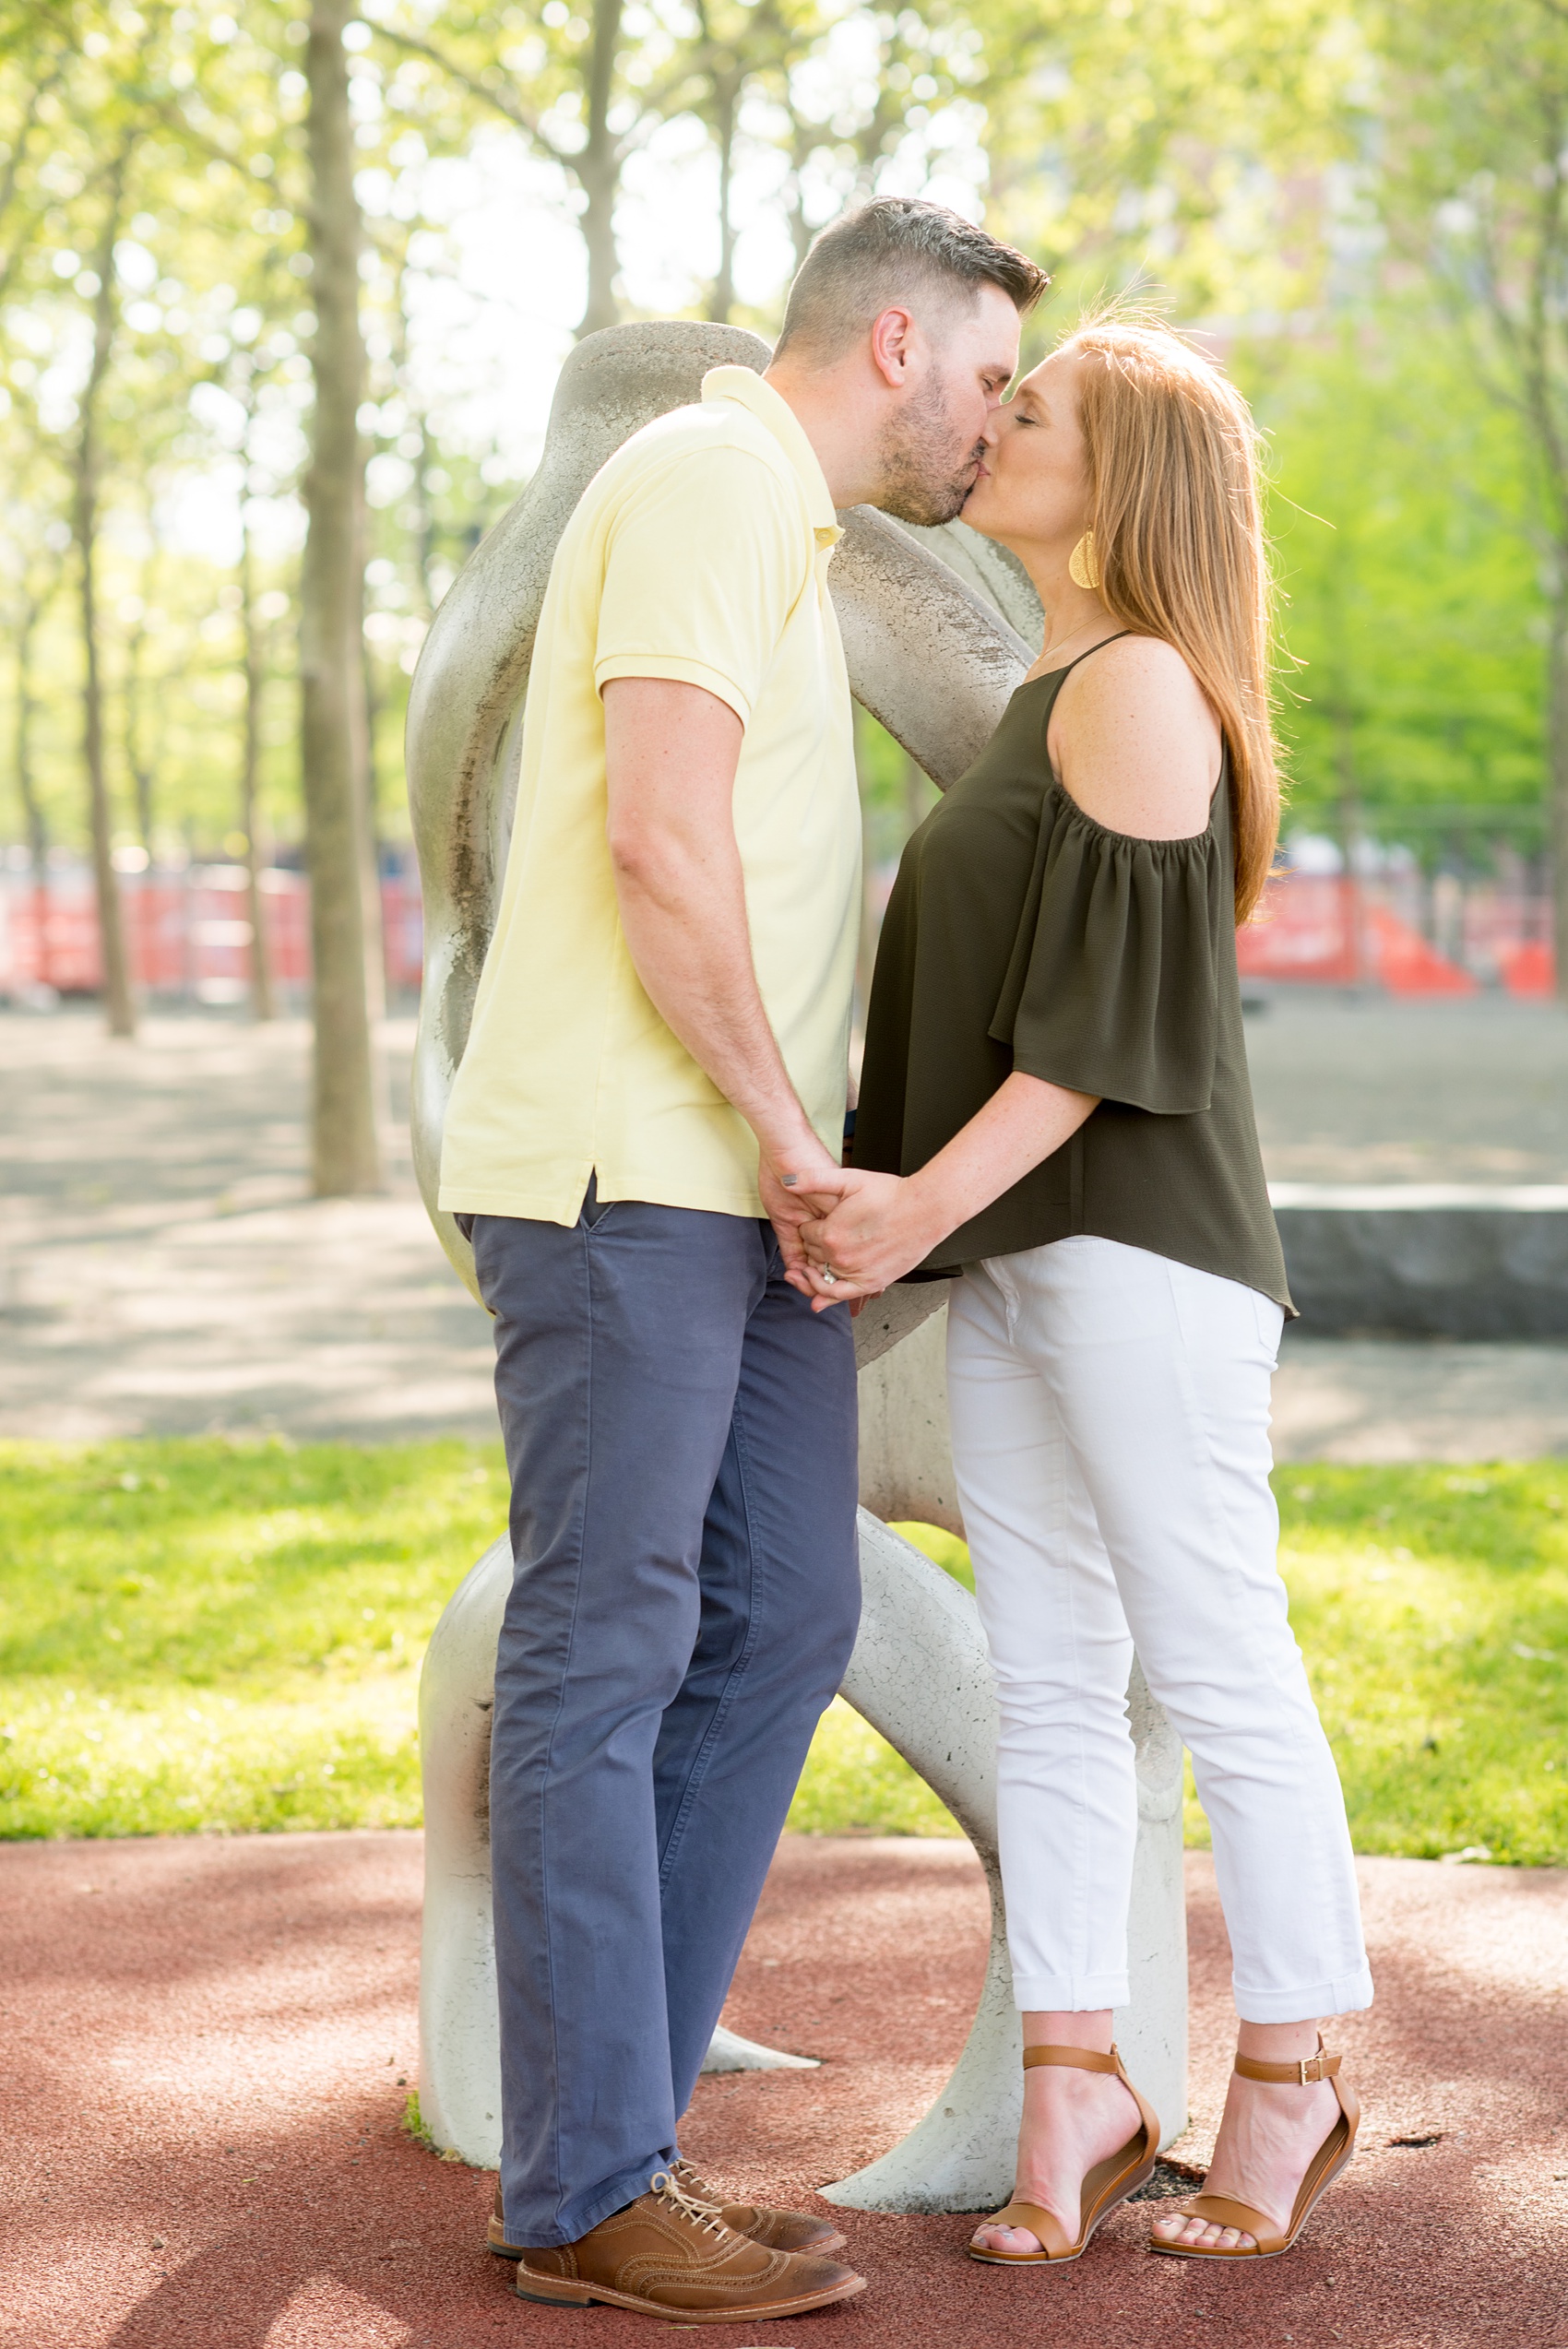 Spring Hoboken Engagement Photos by Mikkel Paige Photography.